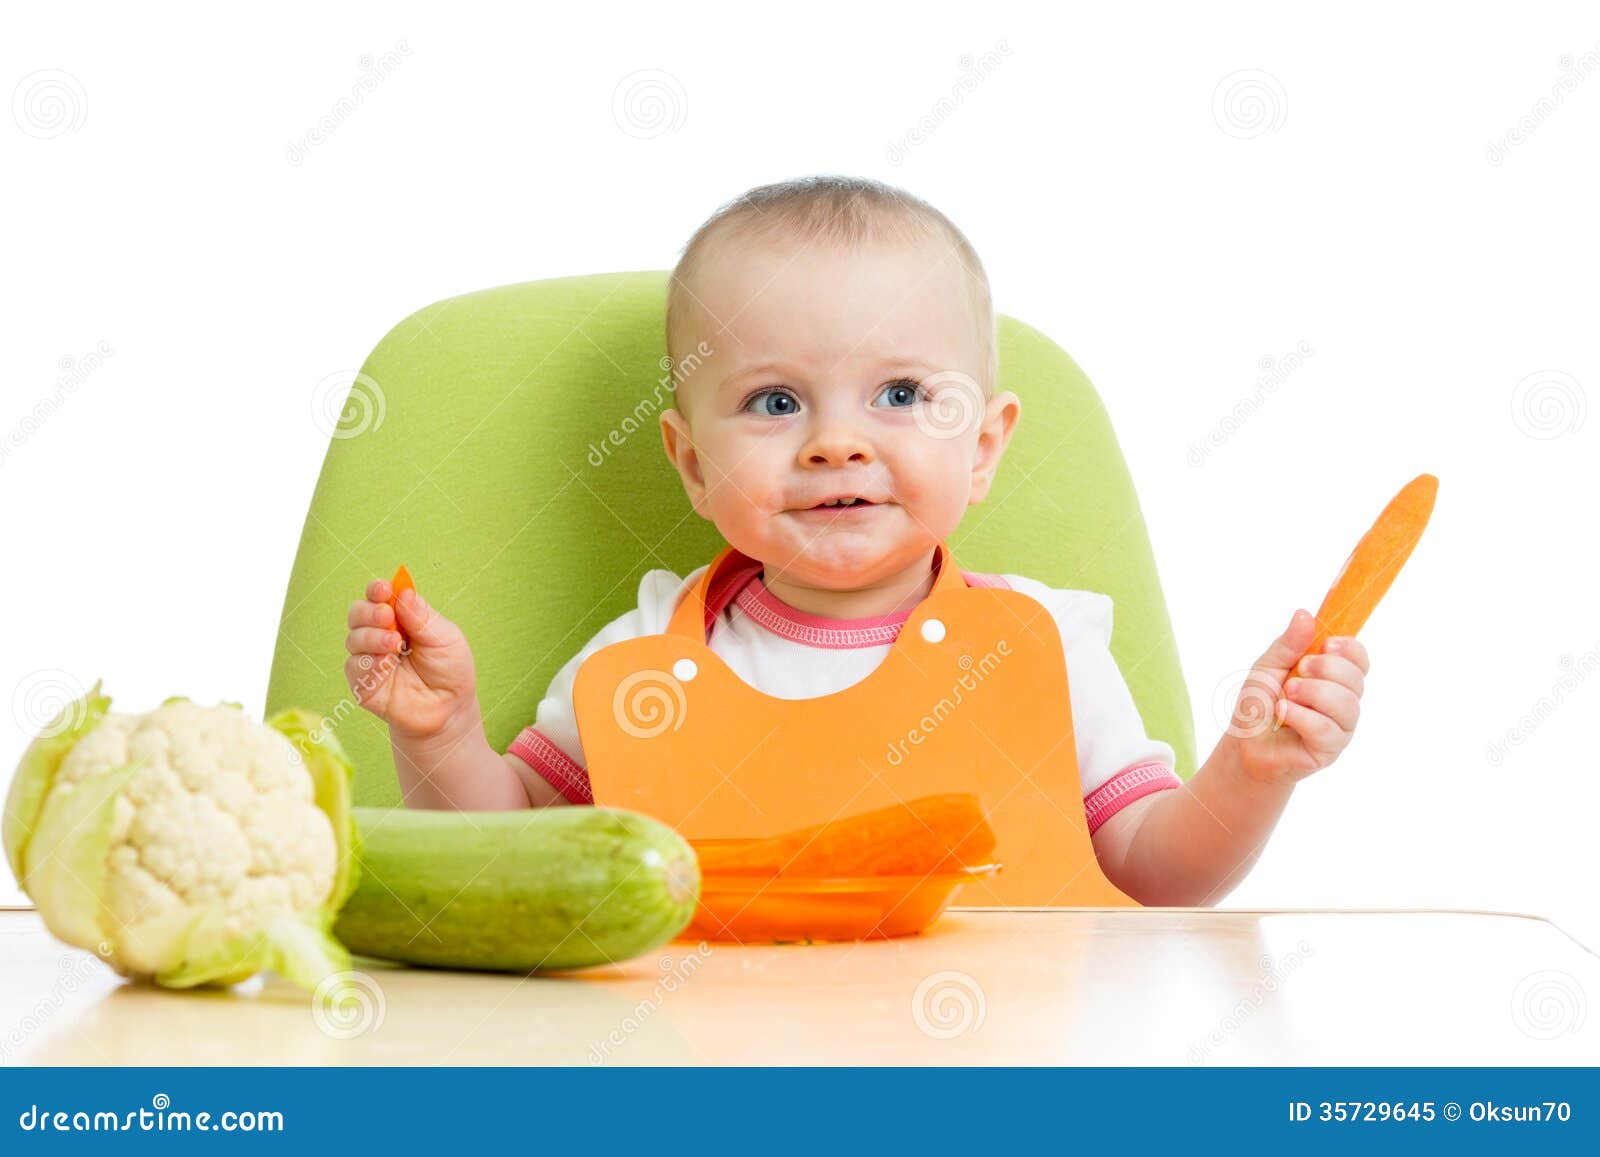 Baby Eating Healthy Vegetables Royalty Free Stock Photo - Image ...